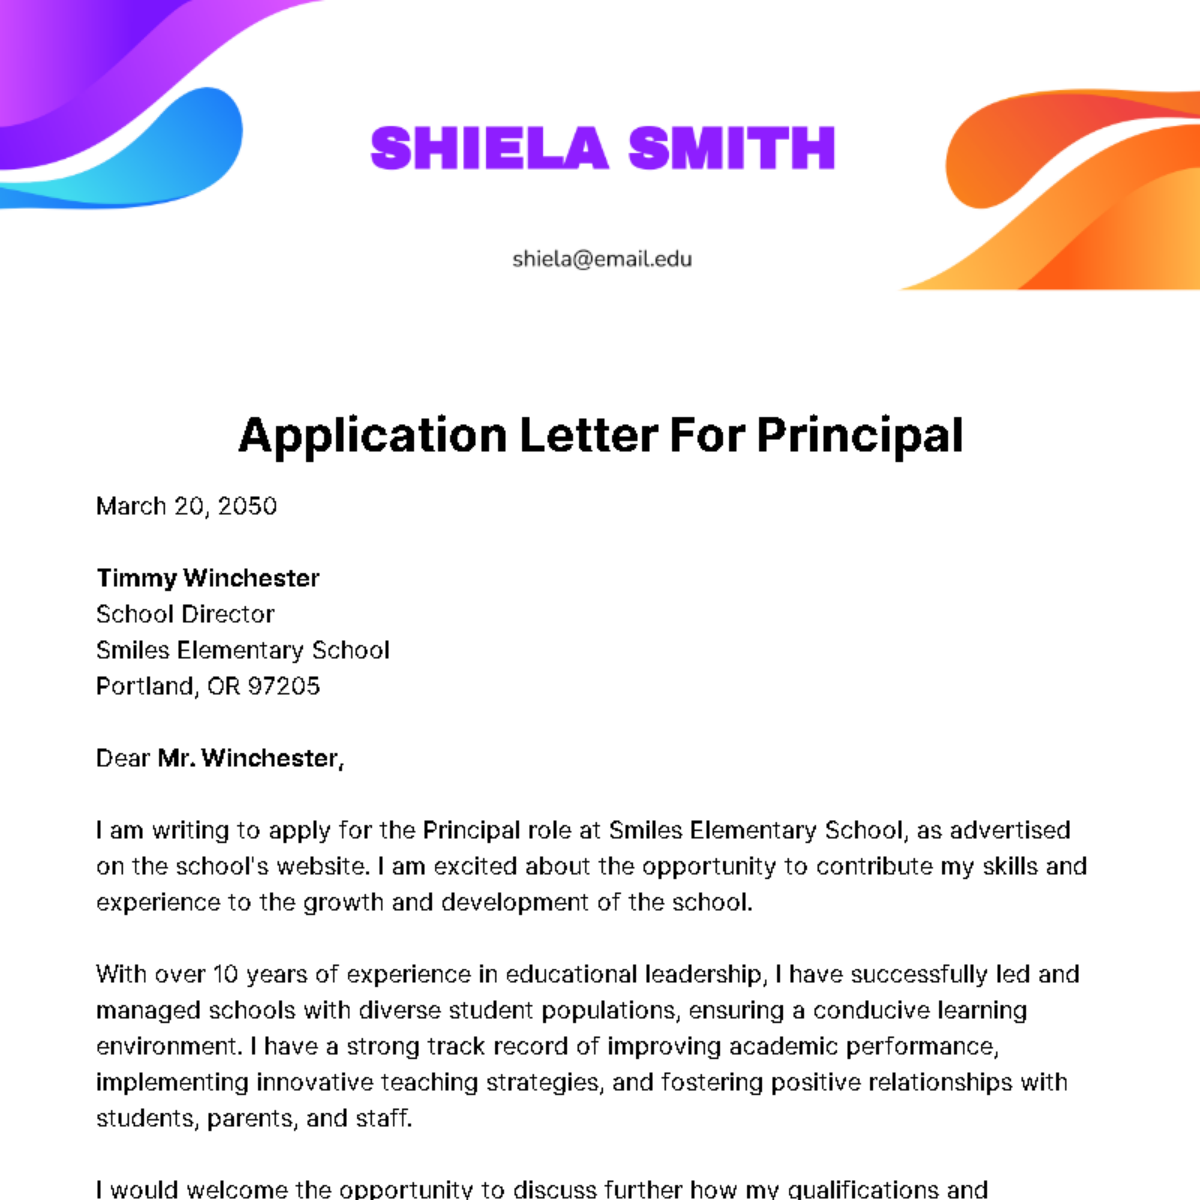 Application Letter for Principal Template